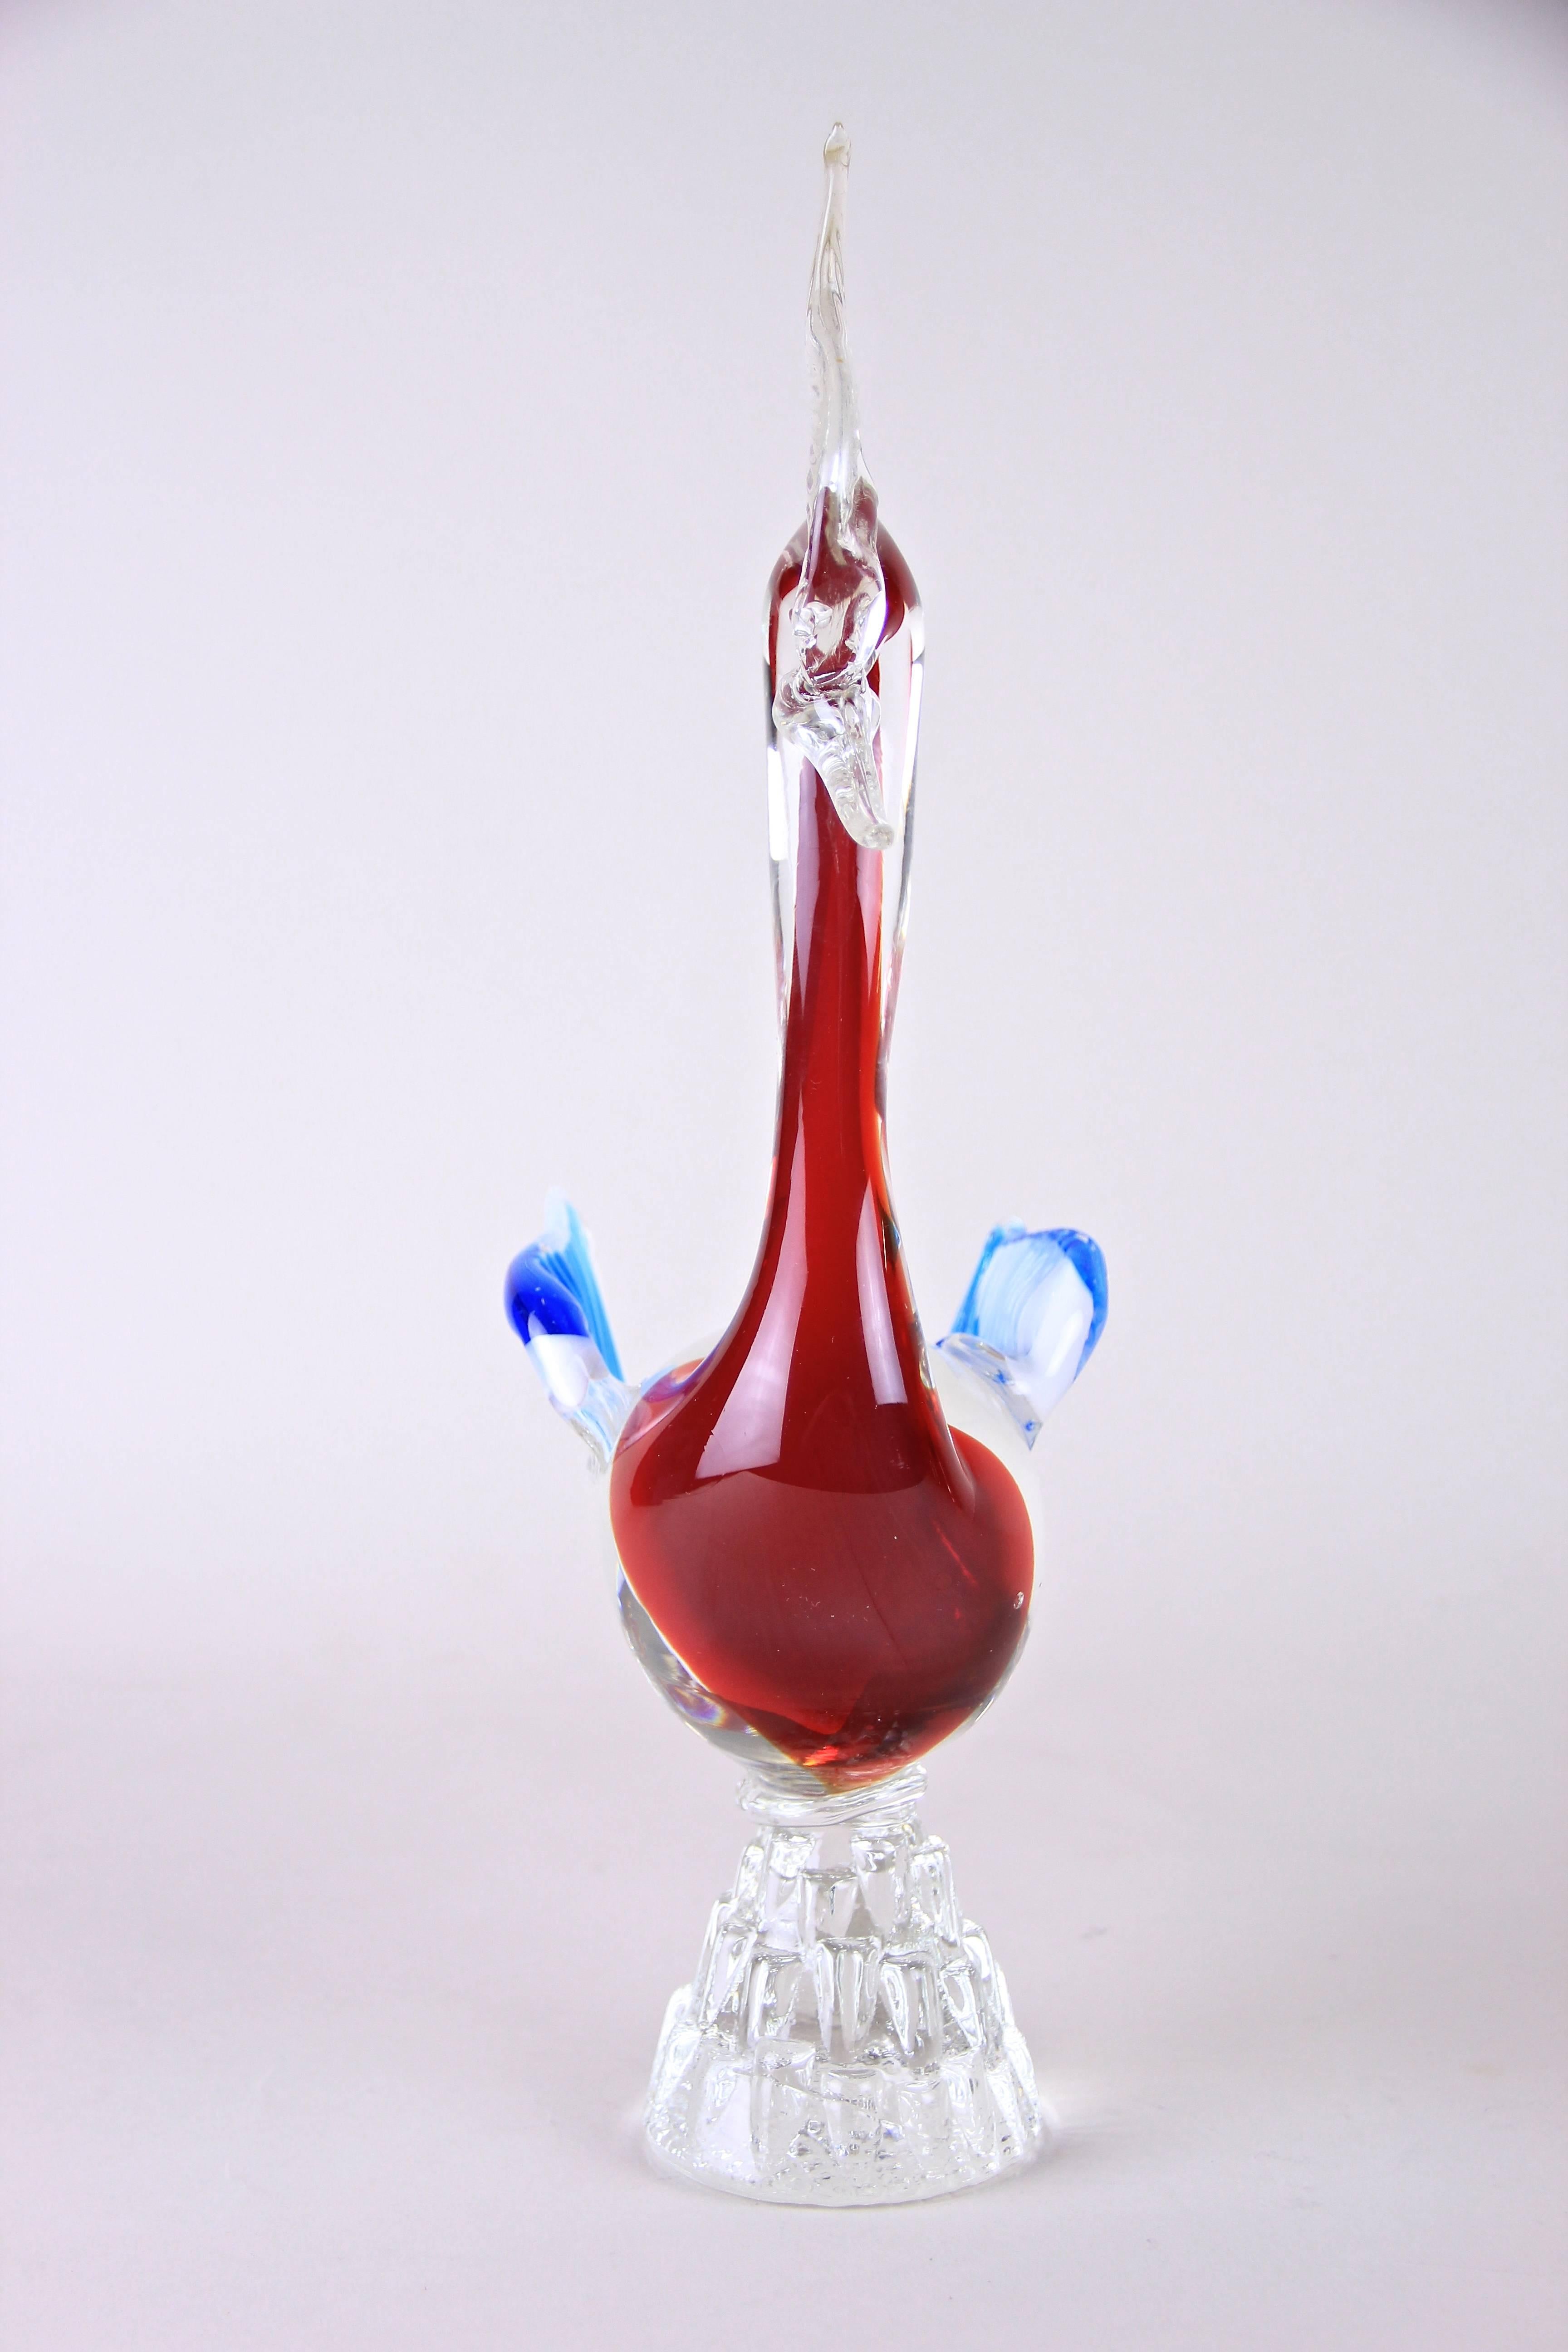 Incredible crafted Murano Glass Art Swan from the famous Murano Glass workshops out of bella Italia around the midcentury. The red/white body in combination with the blue/white colored wings reminds on the US flag and just looks gorgeous!